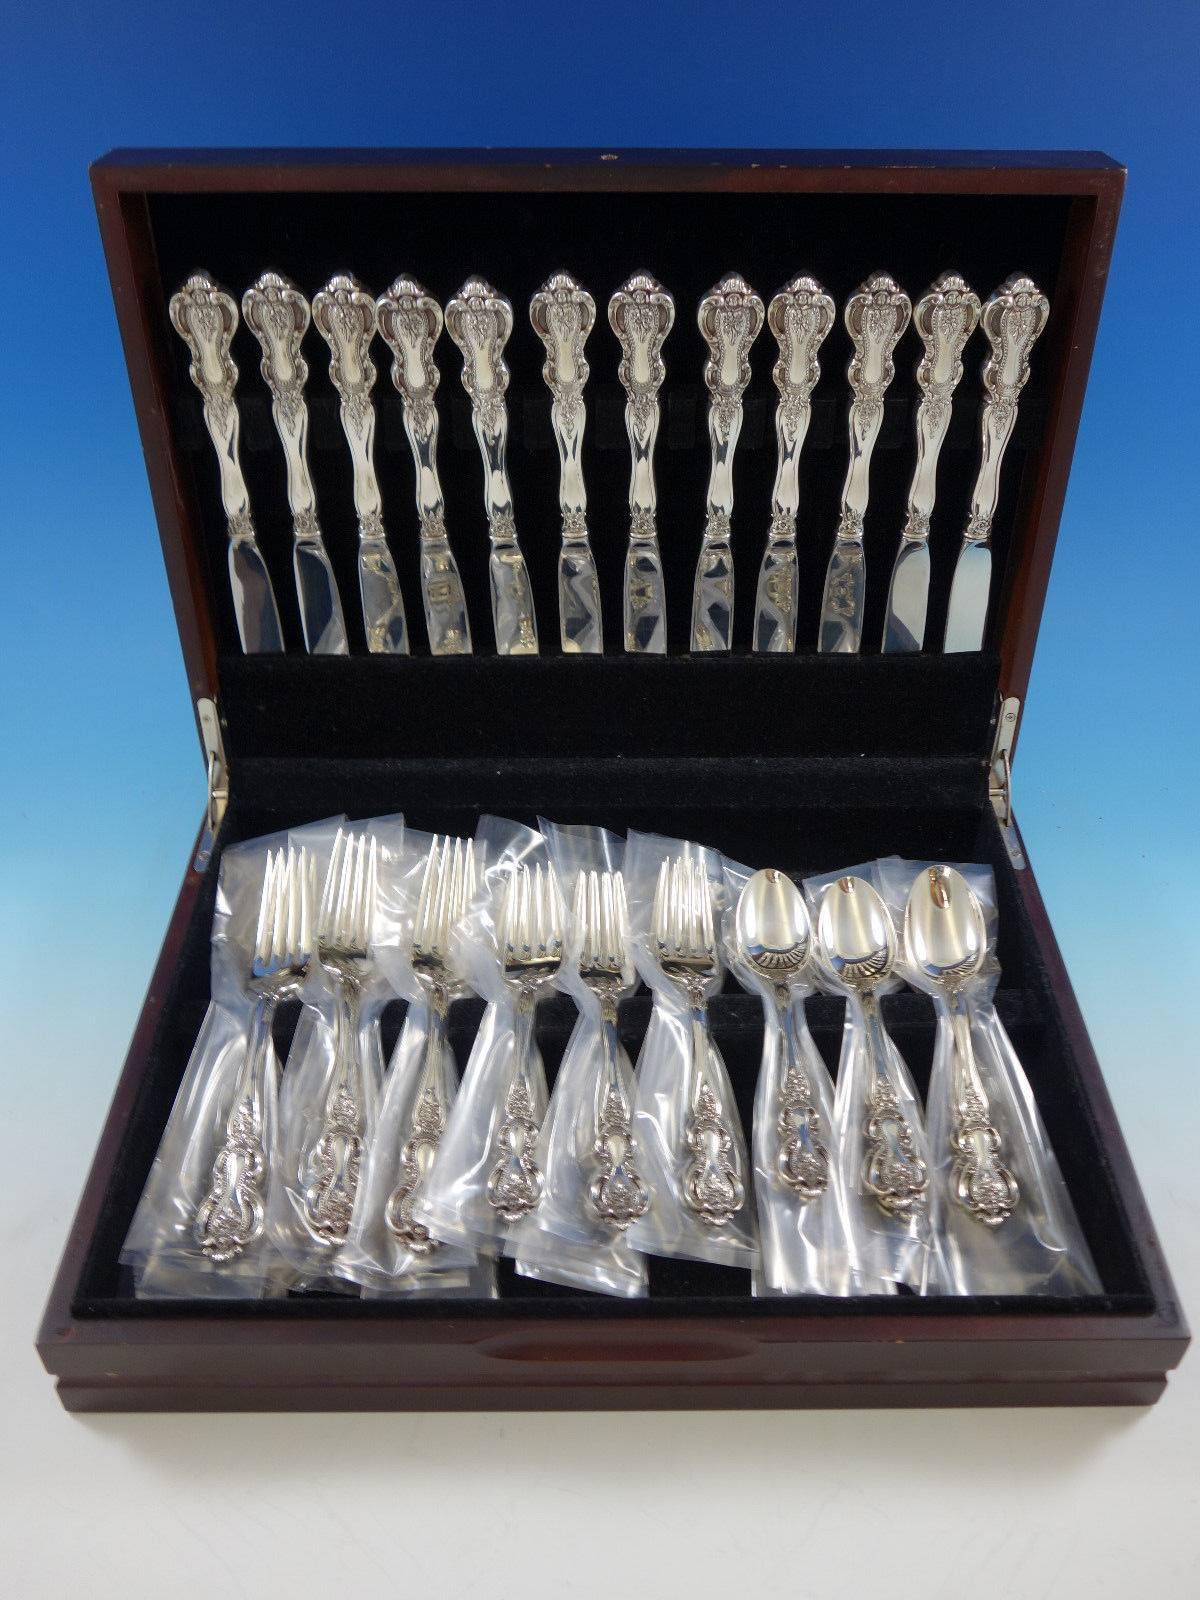 Beautiful Belle Auberge by Kirk sterling silver flatware set - 48 pieces. This set includes: 

12 knives, 8 7/8